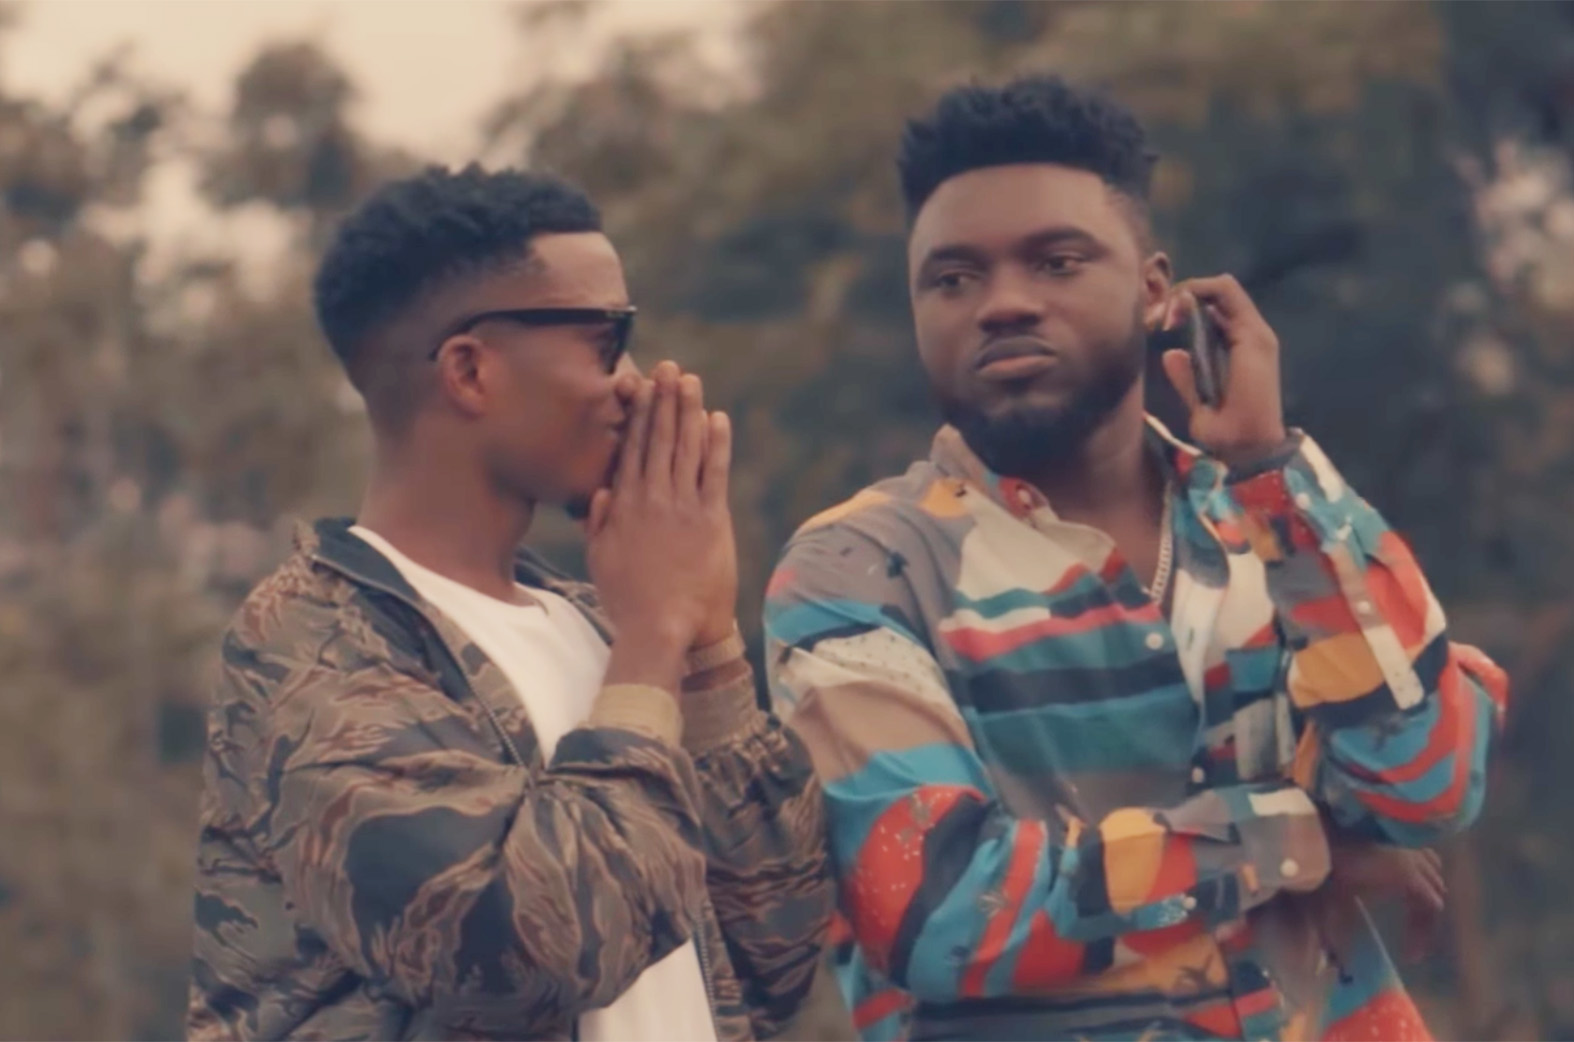 Video Premiere: You And The Devil by Donzy feat. Kofi Kinaata